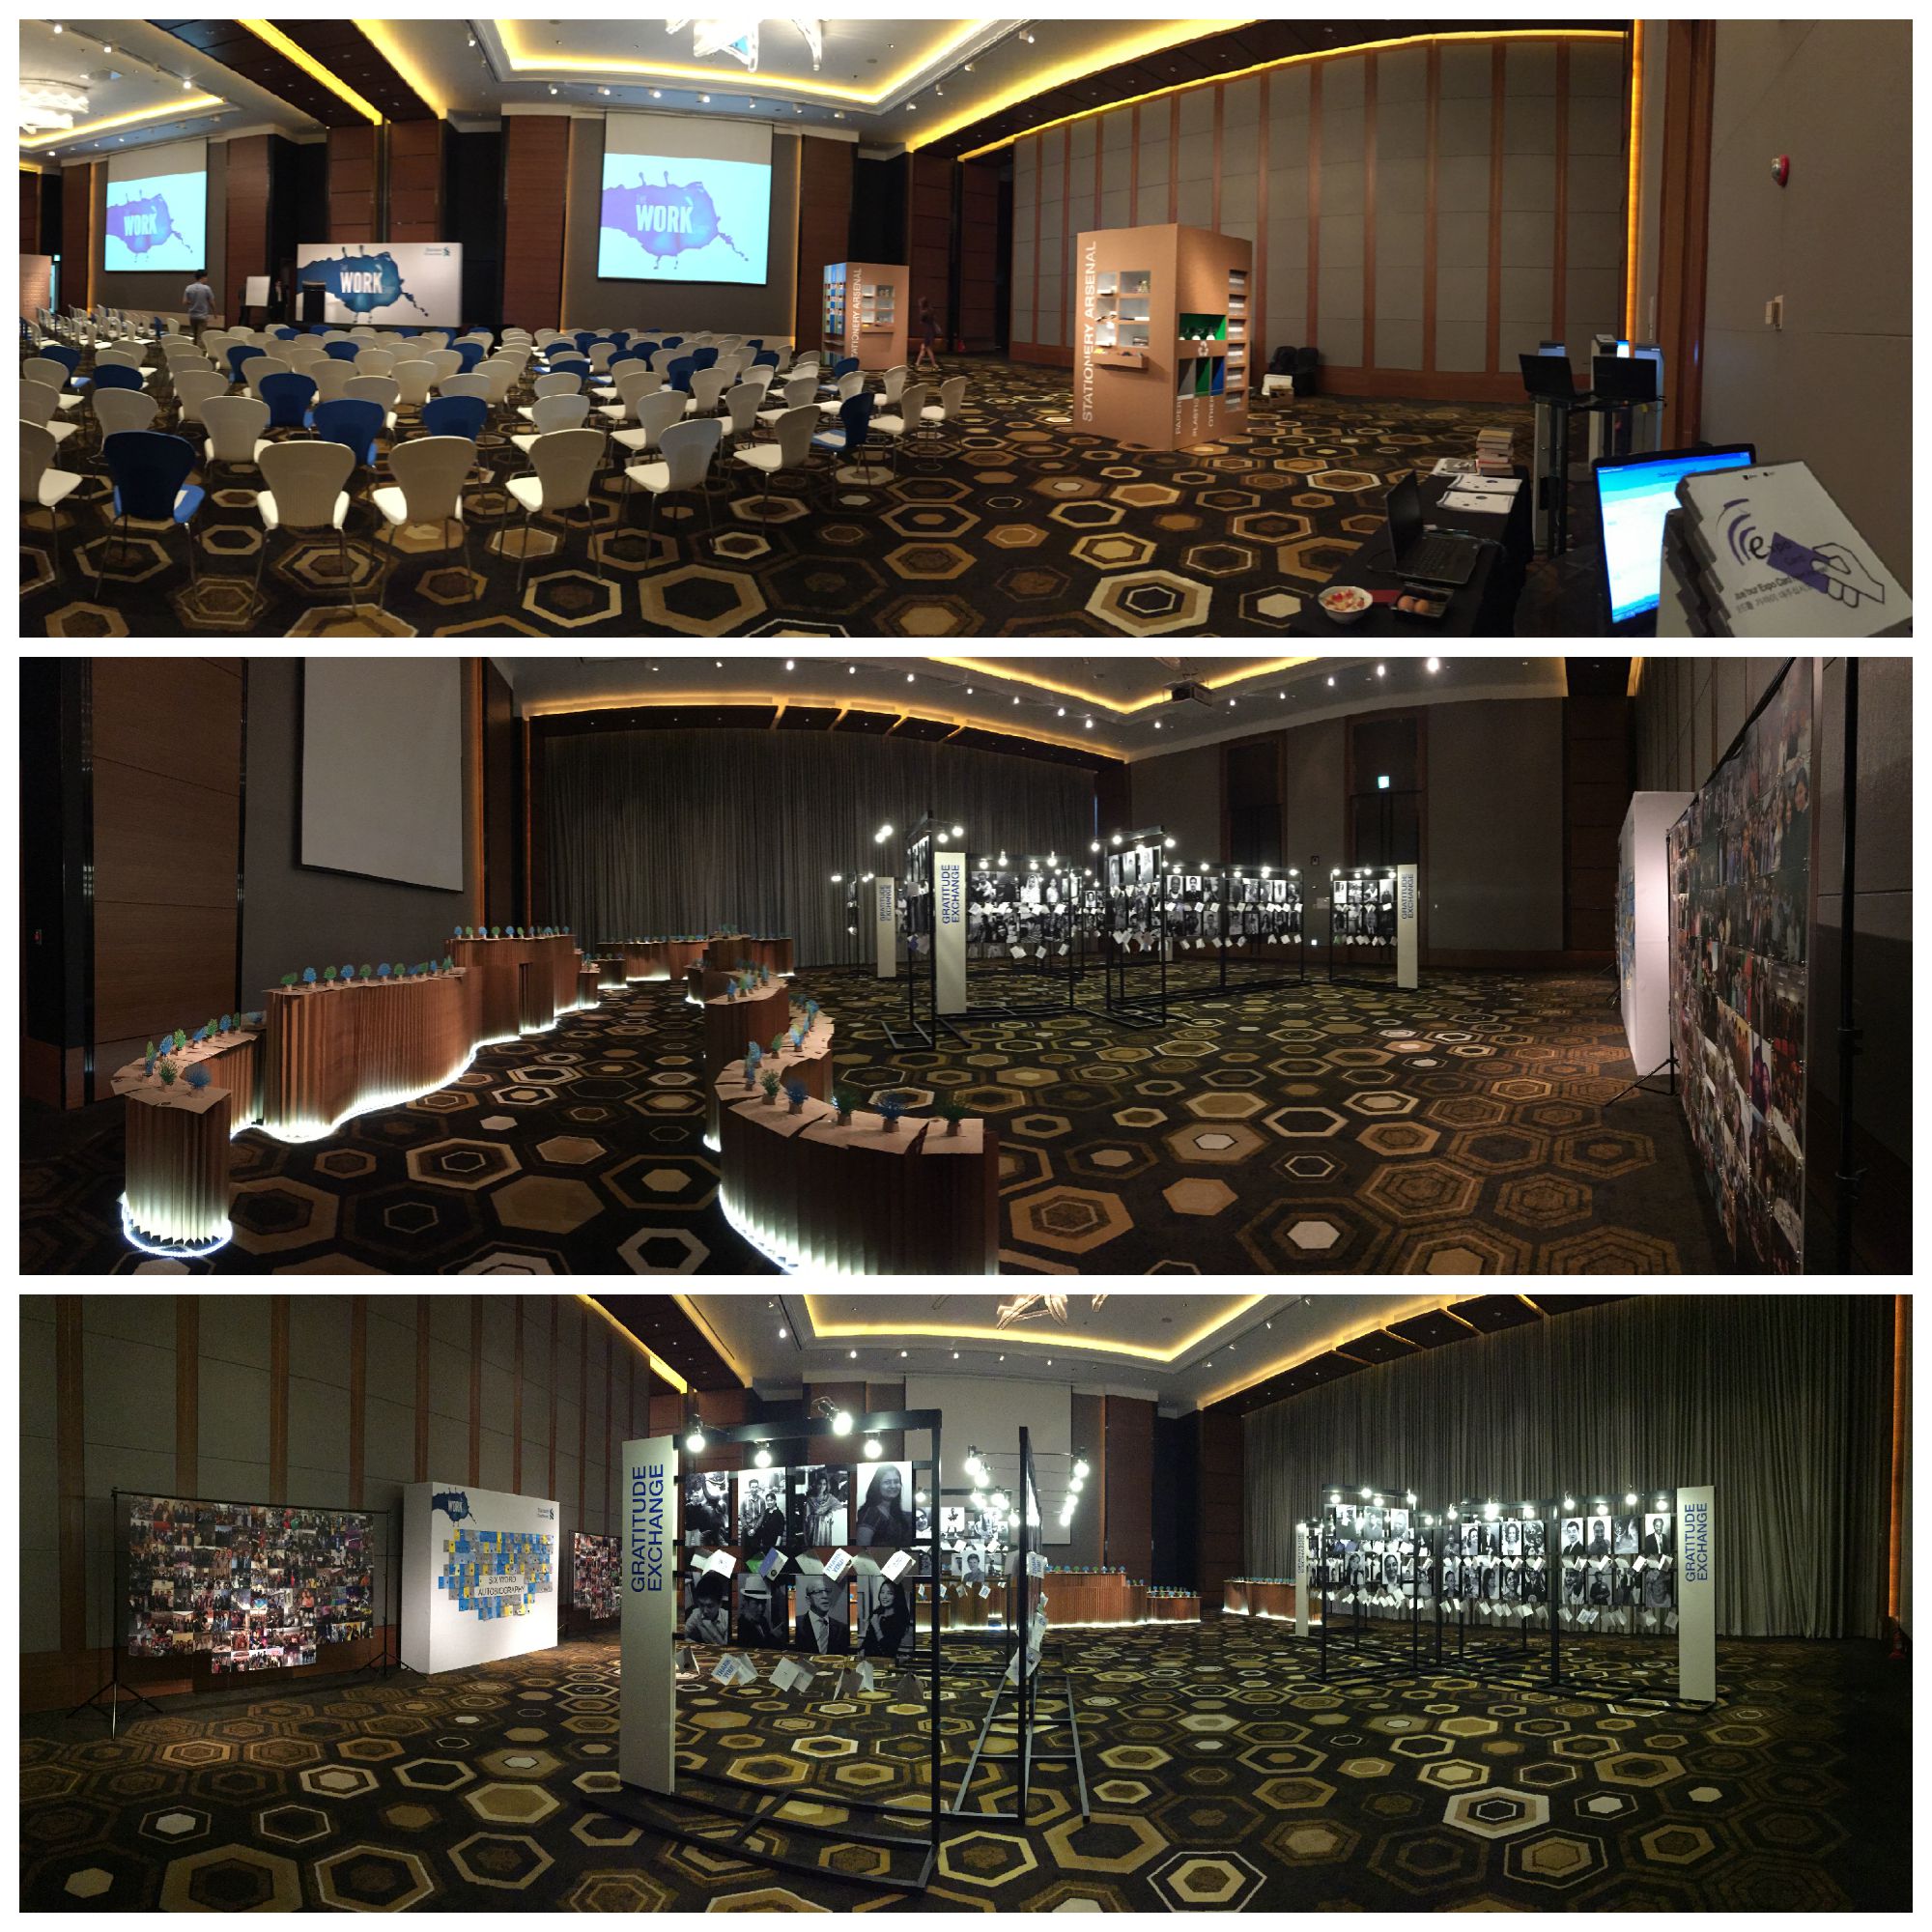 exhibition event layout